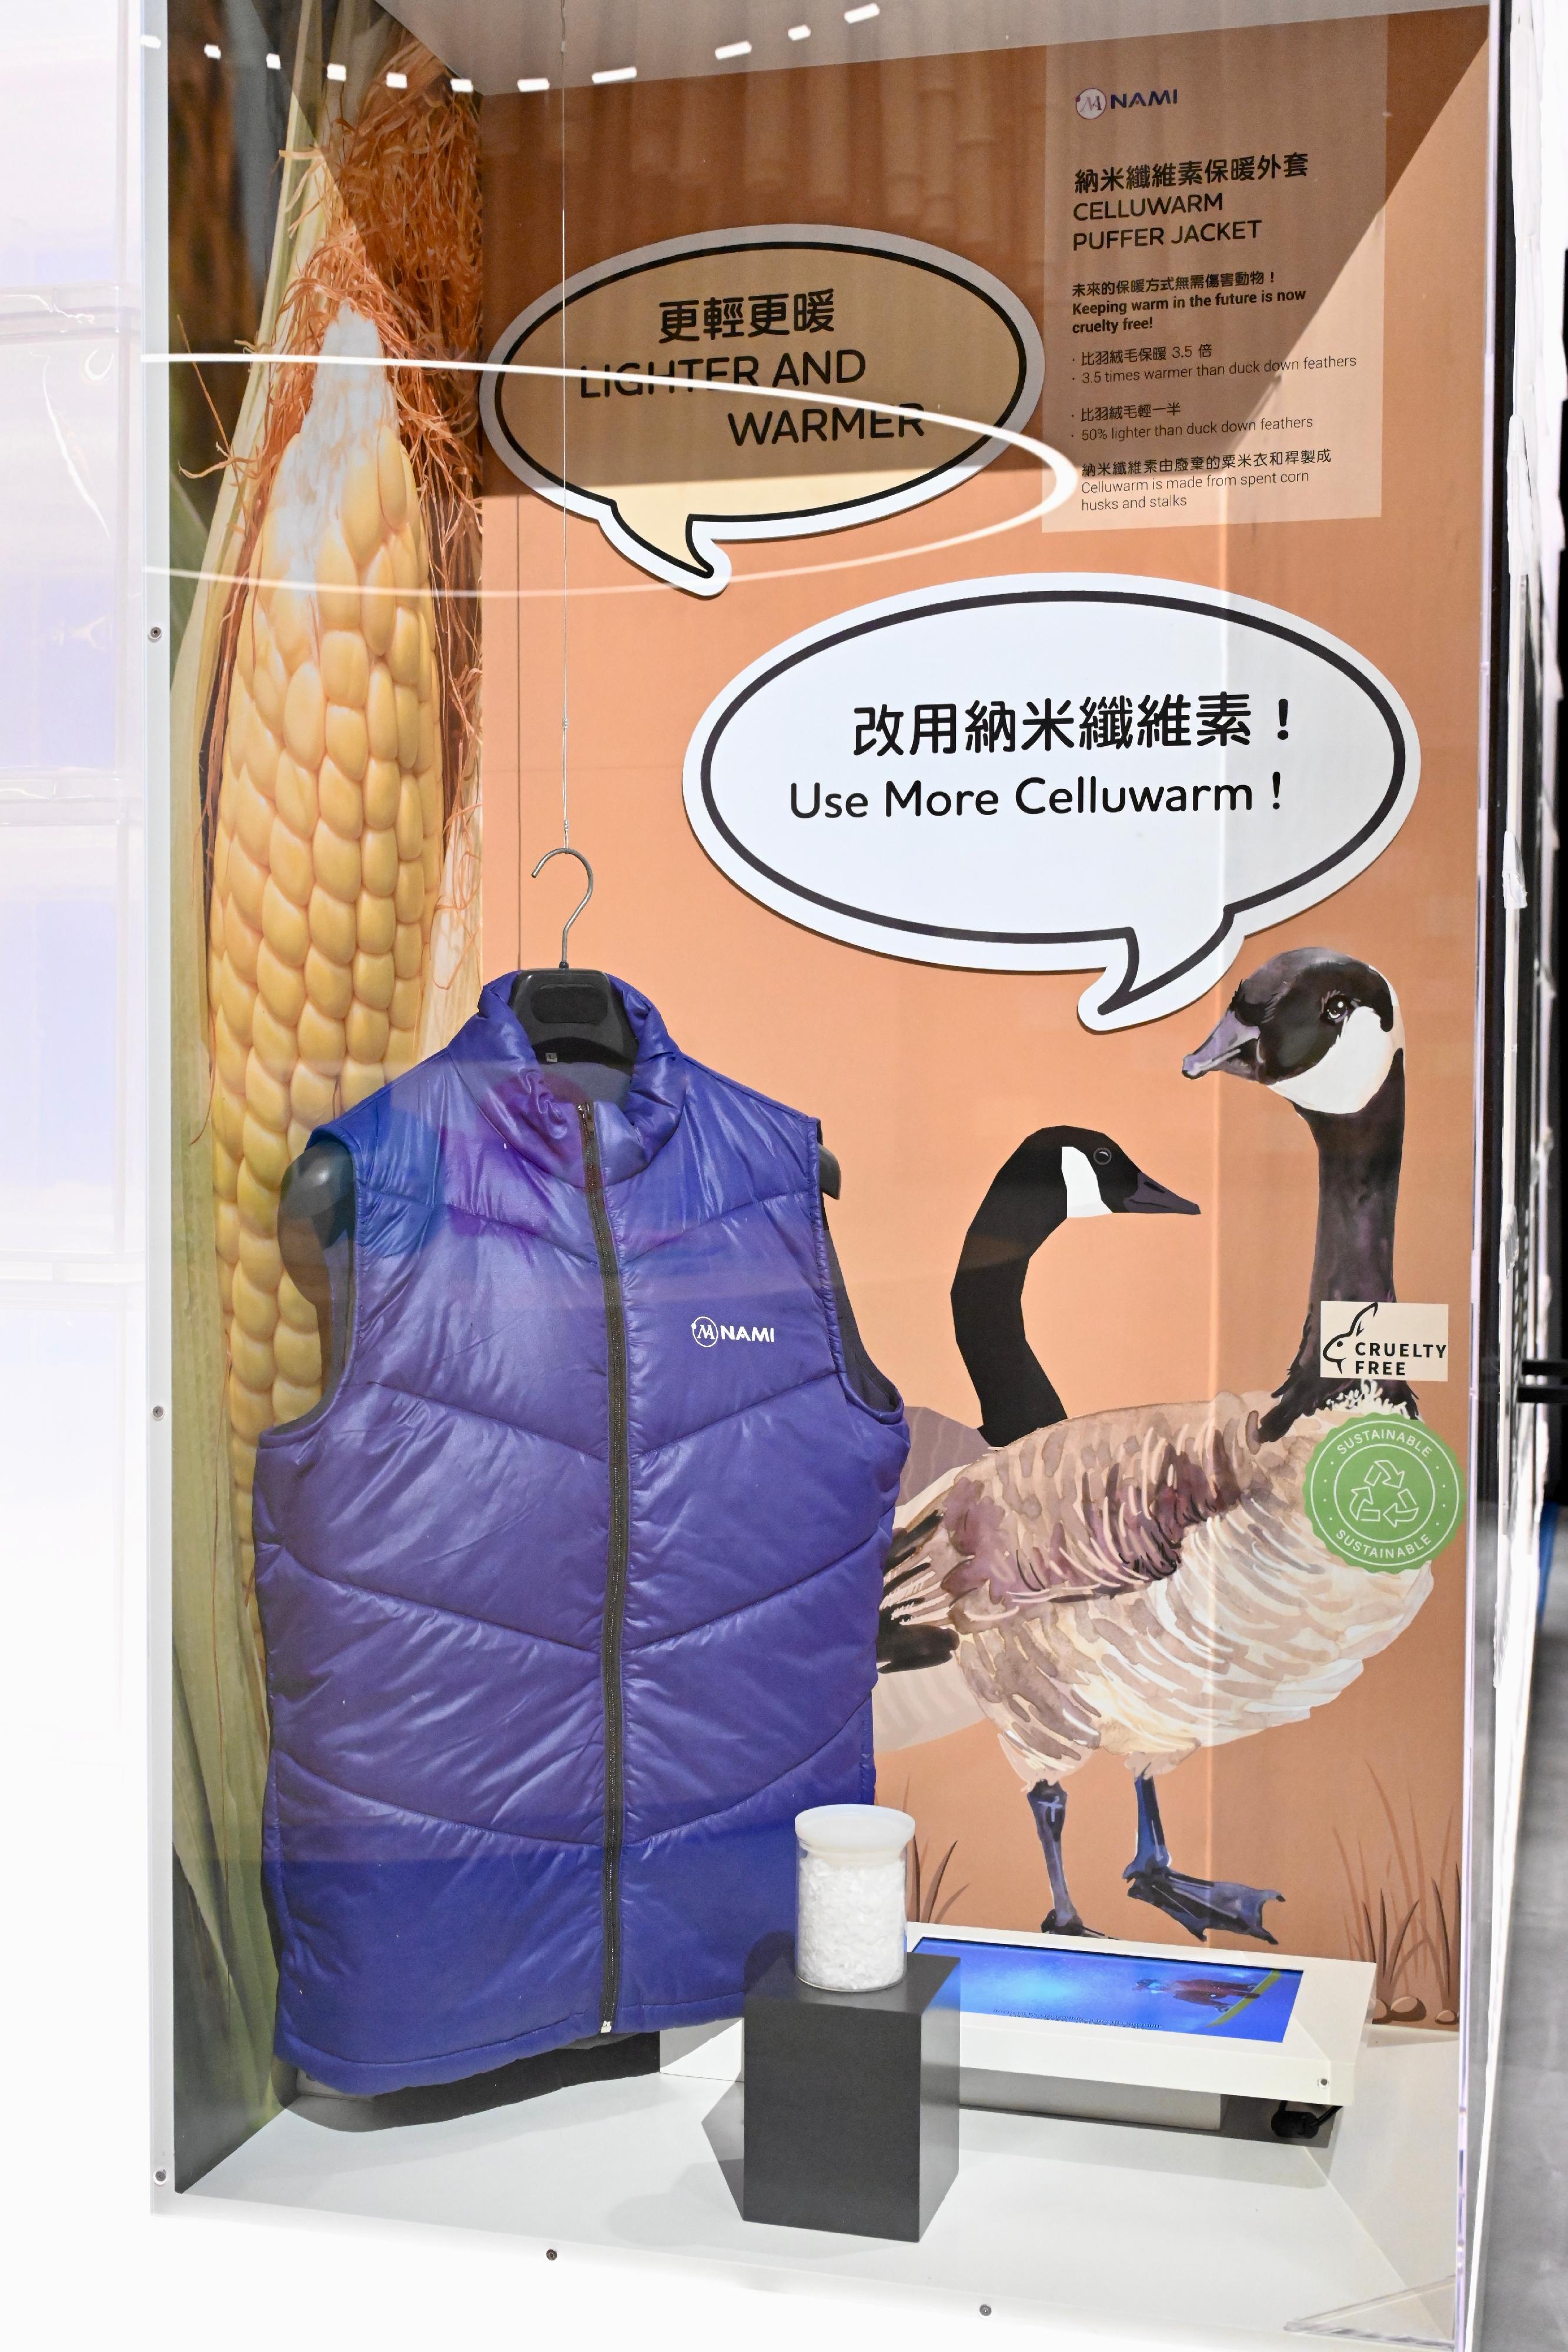 The Hong Kong Science Museum will present the "Material Tales - The Life of Things" exhibition starting from tomorrow (May 19). Photo shows a "Celluwarm Puffer Jacket" made from spent corn husks and stalks. 